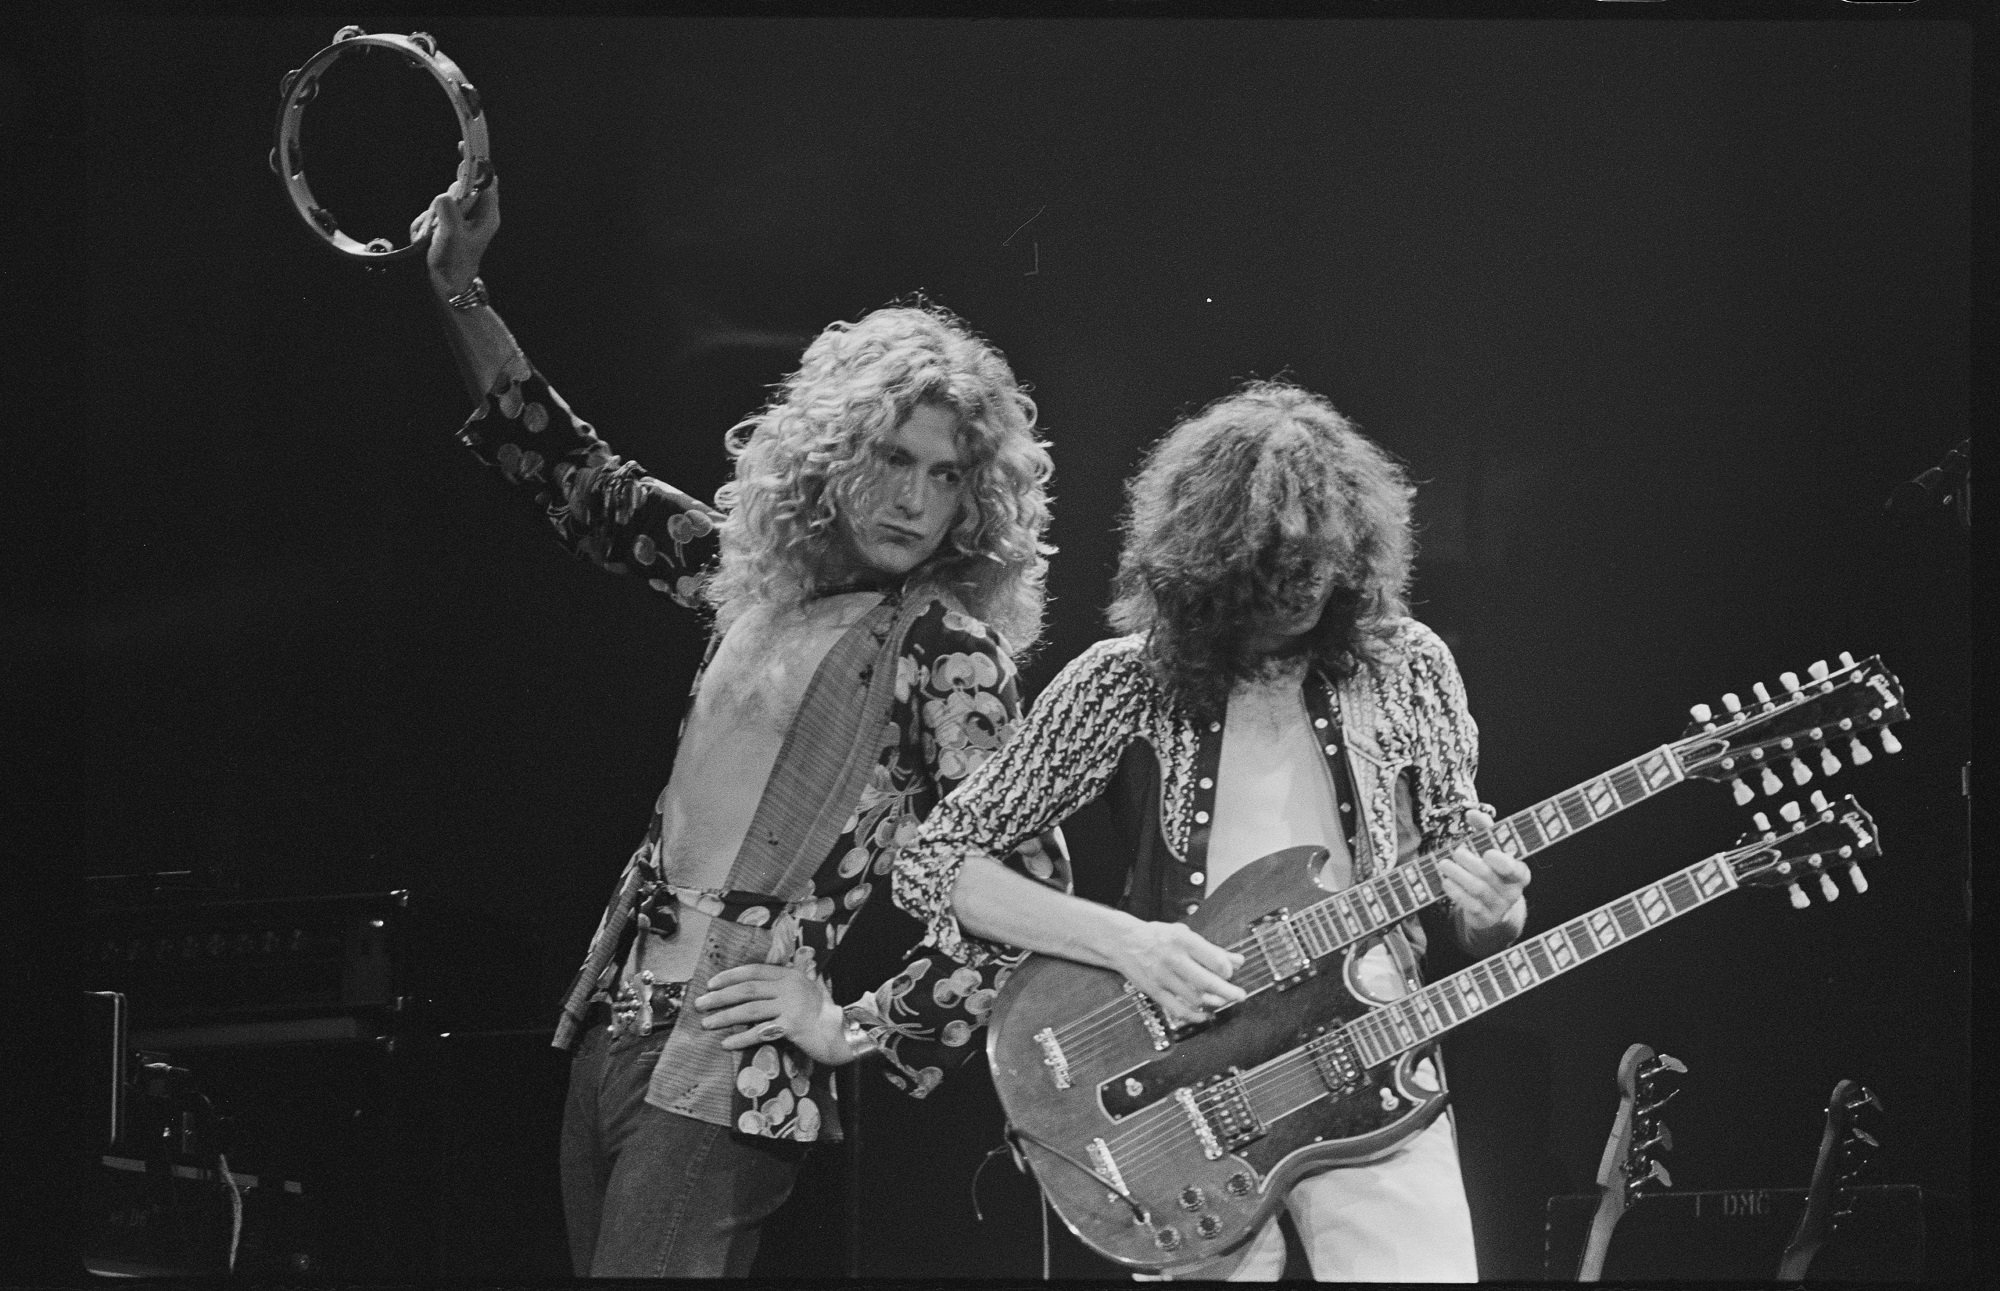 A black-and-white photo of Robert Plant and Jimmy Page performing